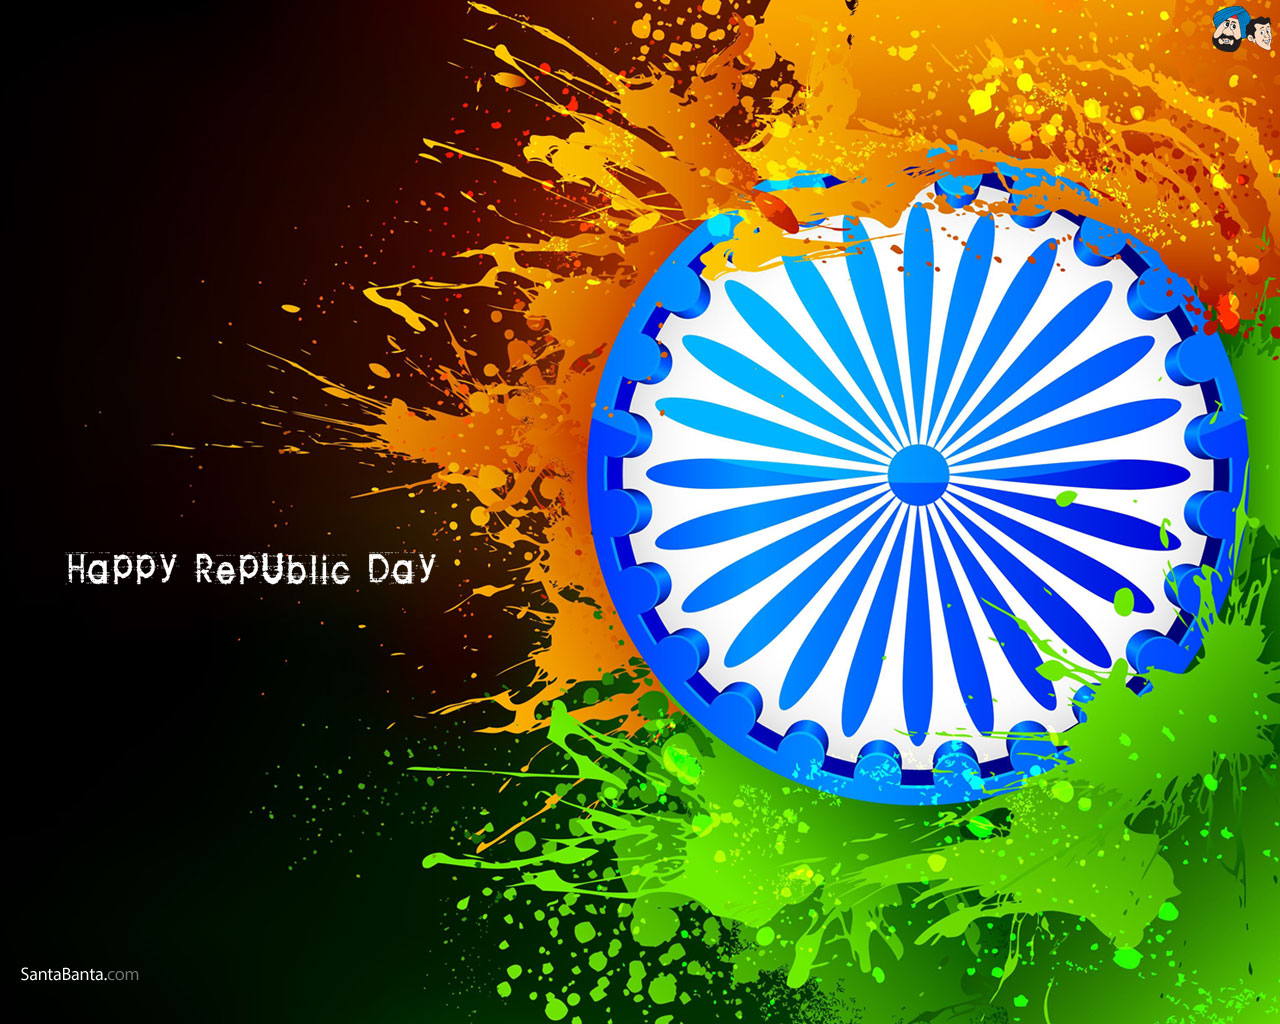 Republic Day HD Wallpapers for Desktop-26 January HQ Wallpaper | Republic  Day Timeline Covers for Facebook